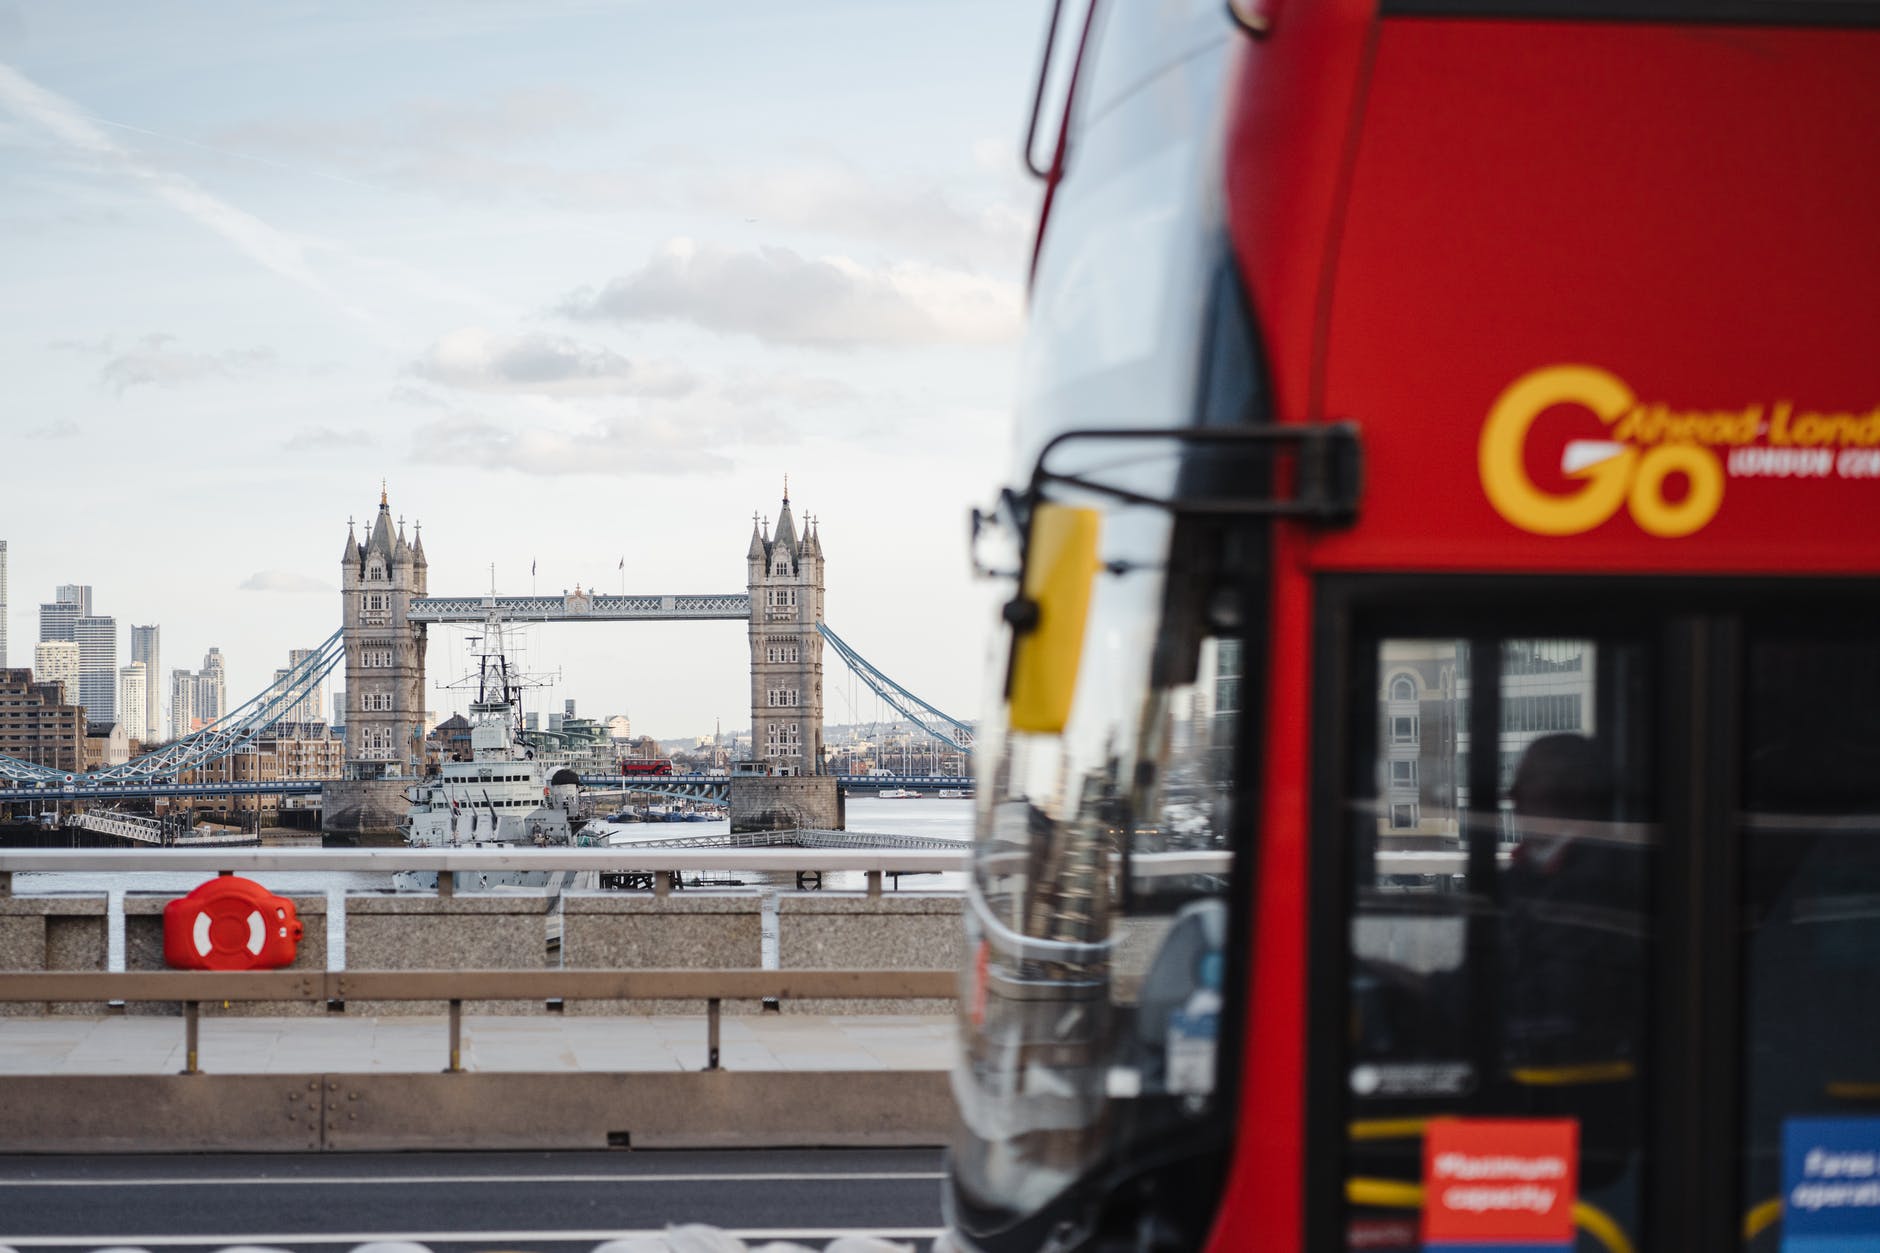 London Bus and Tower Bridge in background